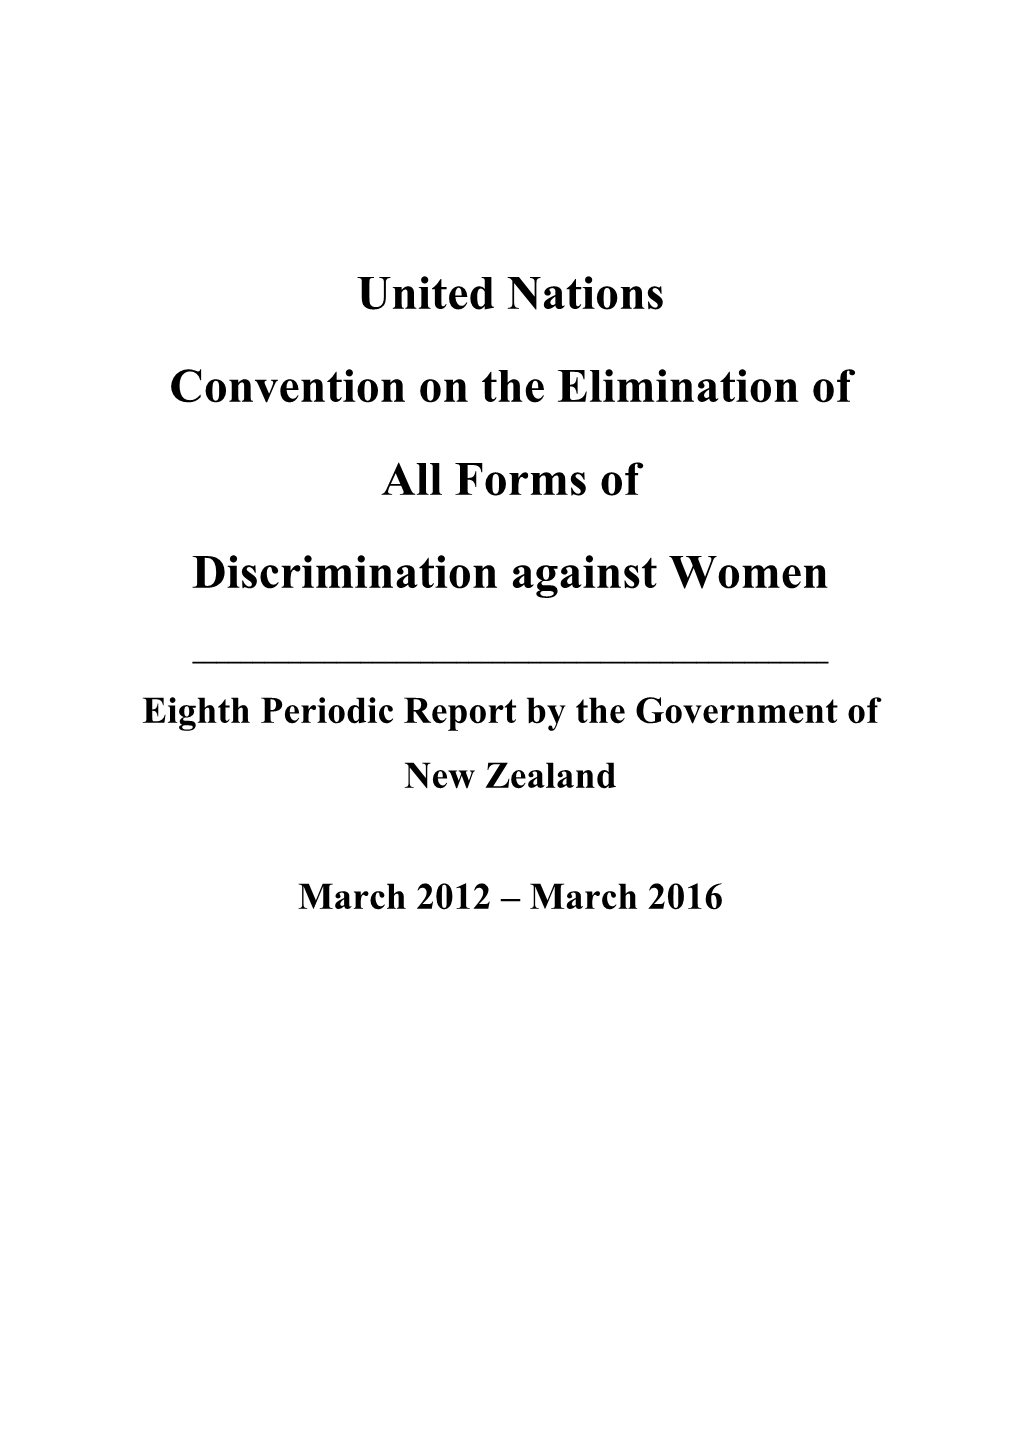 New Zealand's Eighth Periodic Report CEDAW